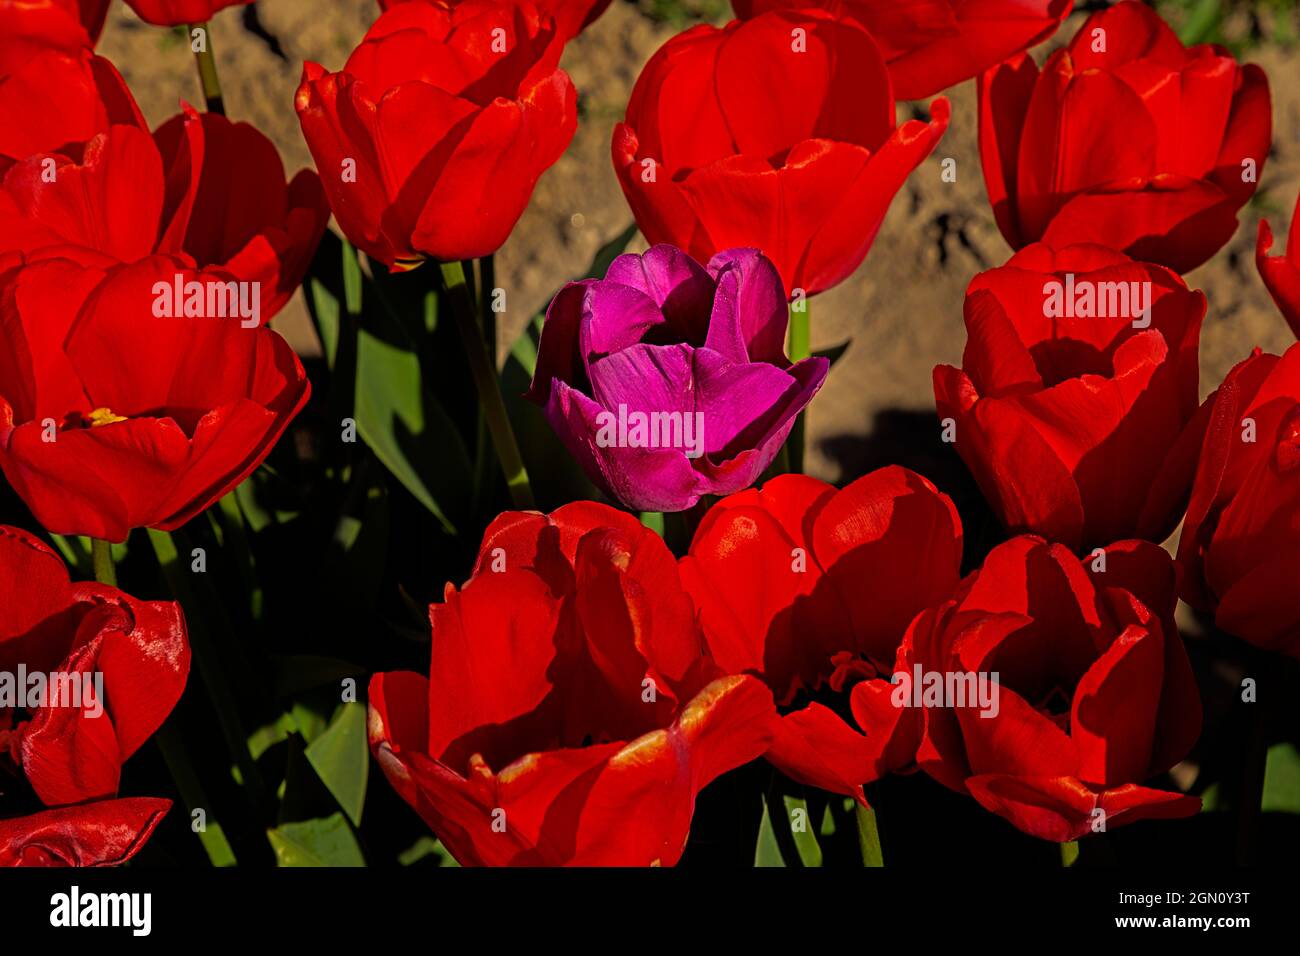 WA19639-00...WASHINGTON - One misplaced tulip in a row of  red tulips blooming in a field at RoozenGaarde Bulb Farm in the Skagit Valley. Stock Photo